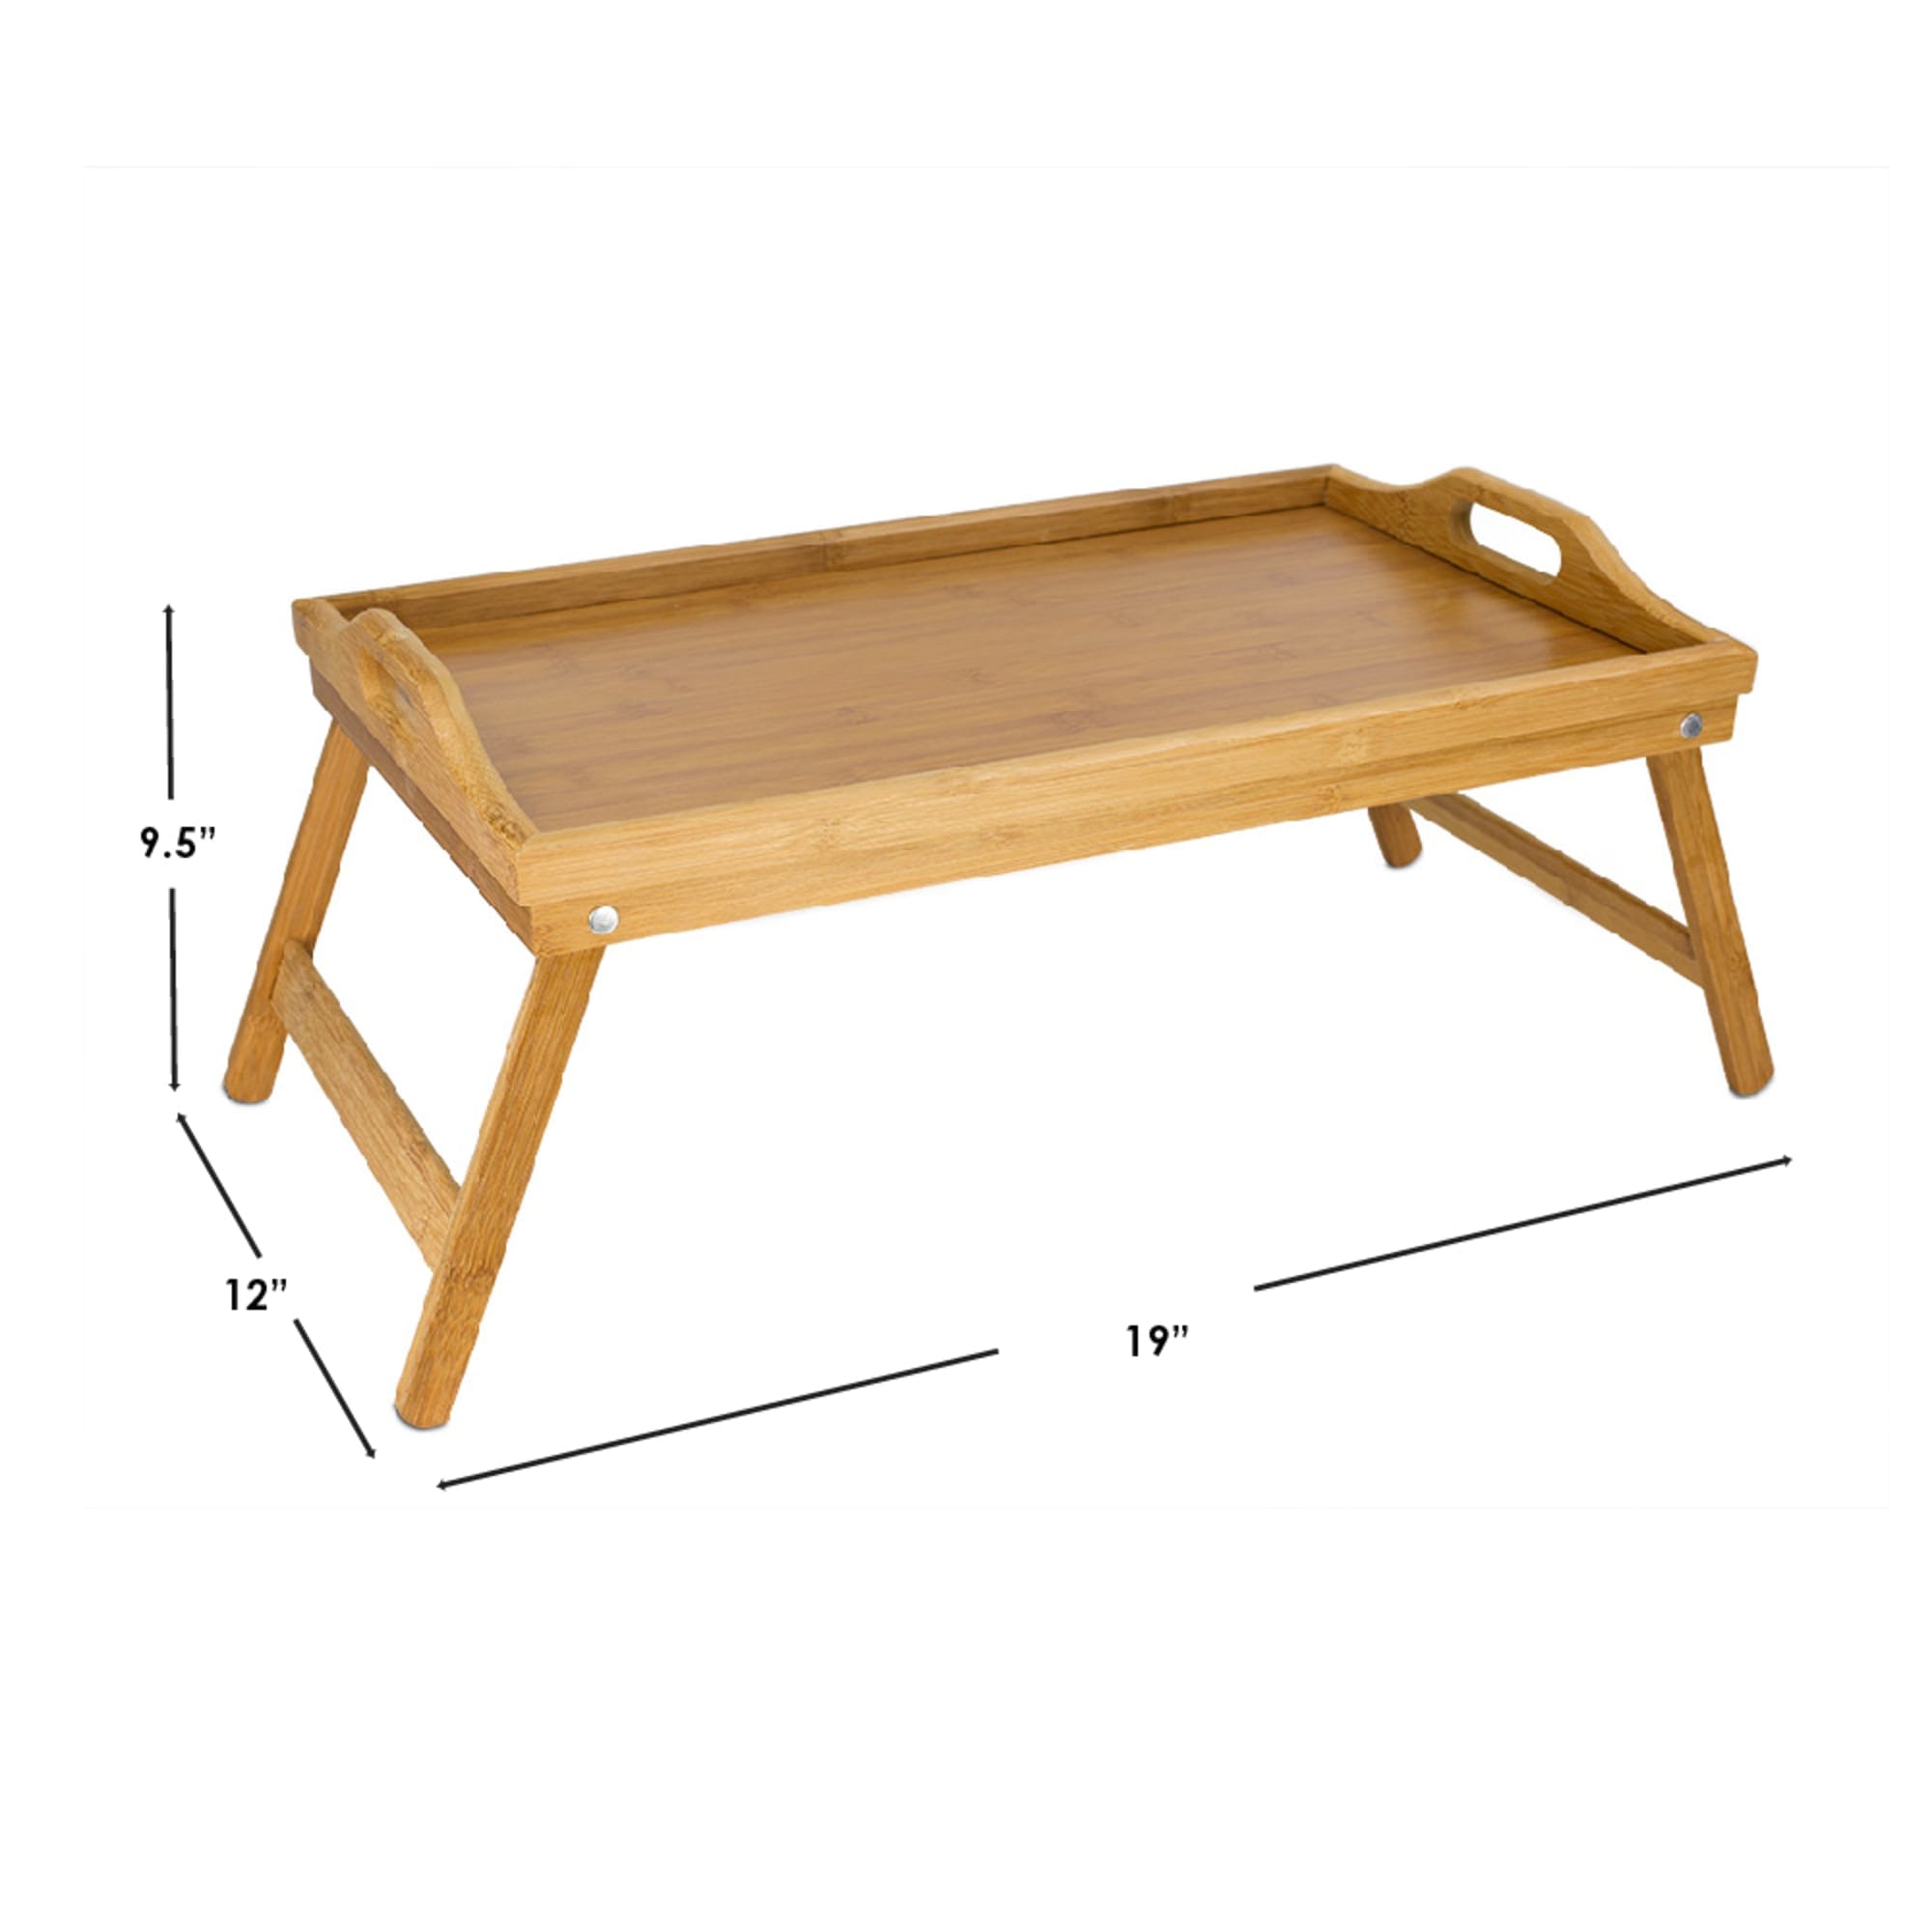 Home Basics Multi-Purpose Folding Bamboo Bed Tray with Cut-out Handles $15.00 EACH, CASE PACK OF 6